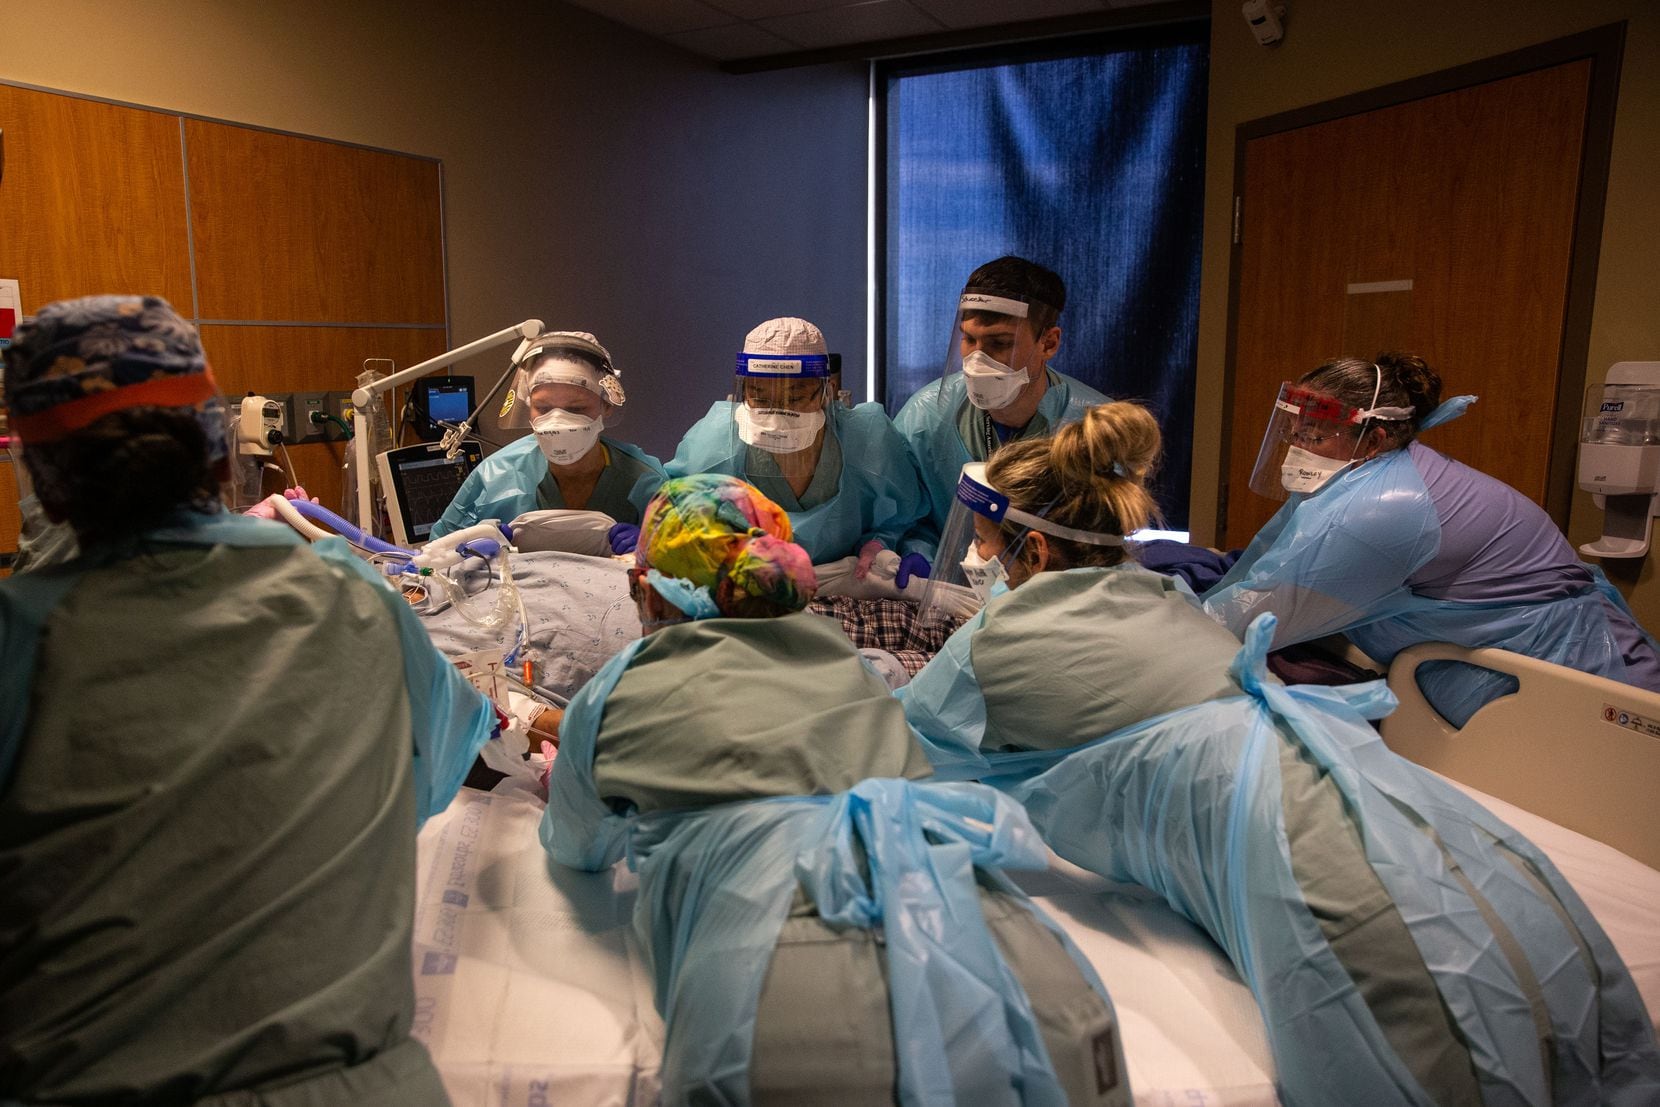 Samantha Rowley (far right) assists a team of caregivers, led by Dr. Catherine Chen (center), as they move a COVID-19 patient from one bed to another following his intubation at Parkland.